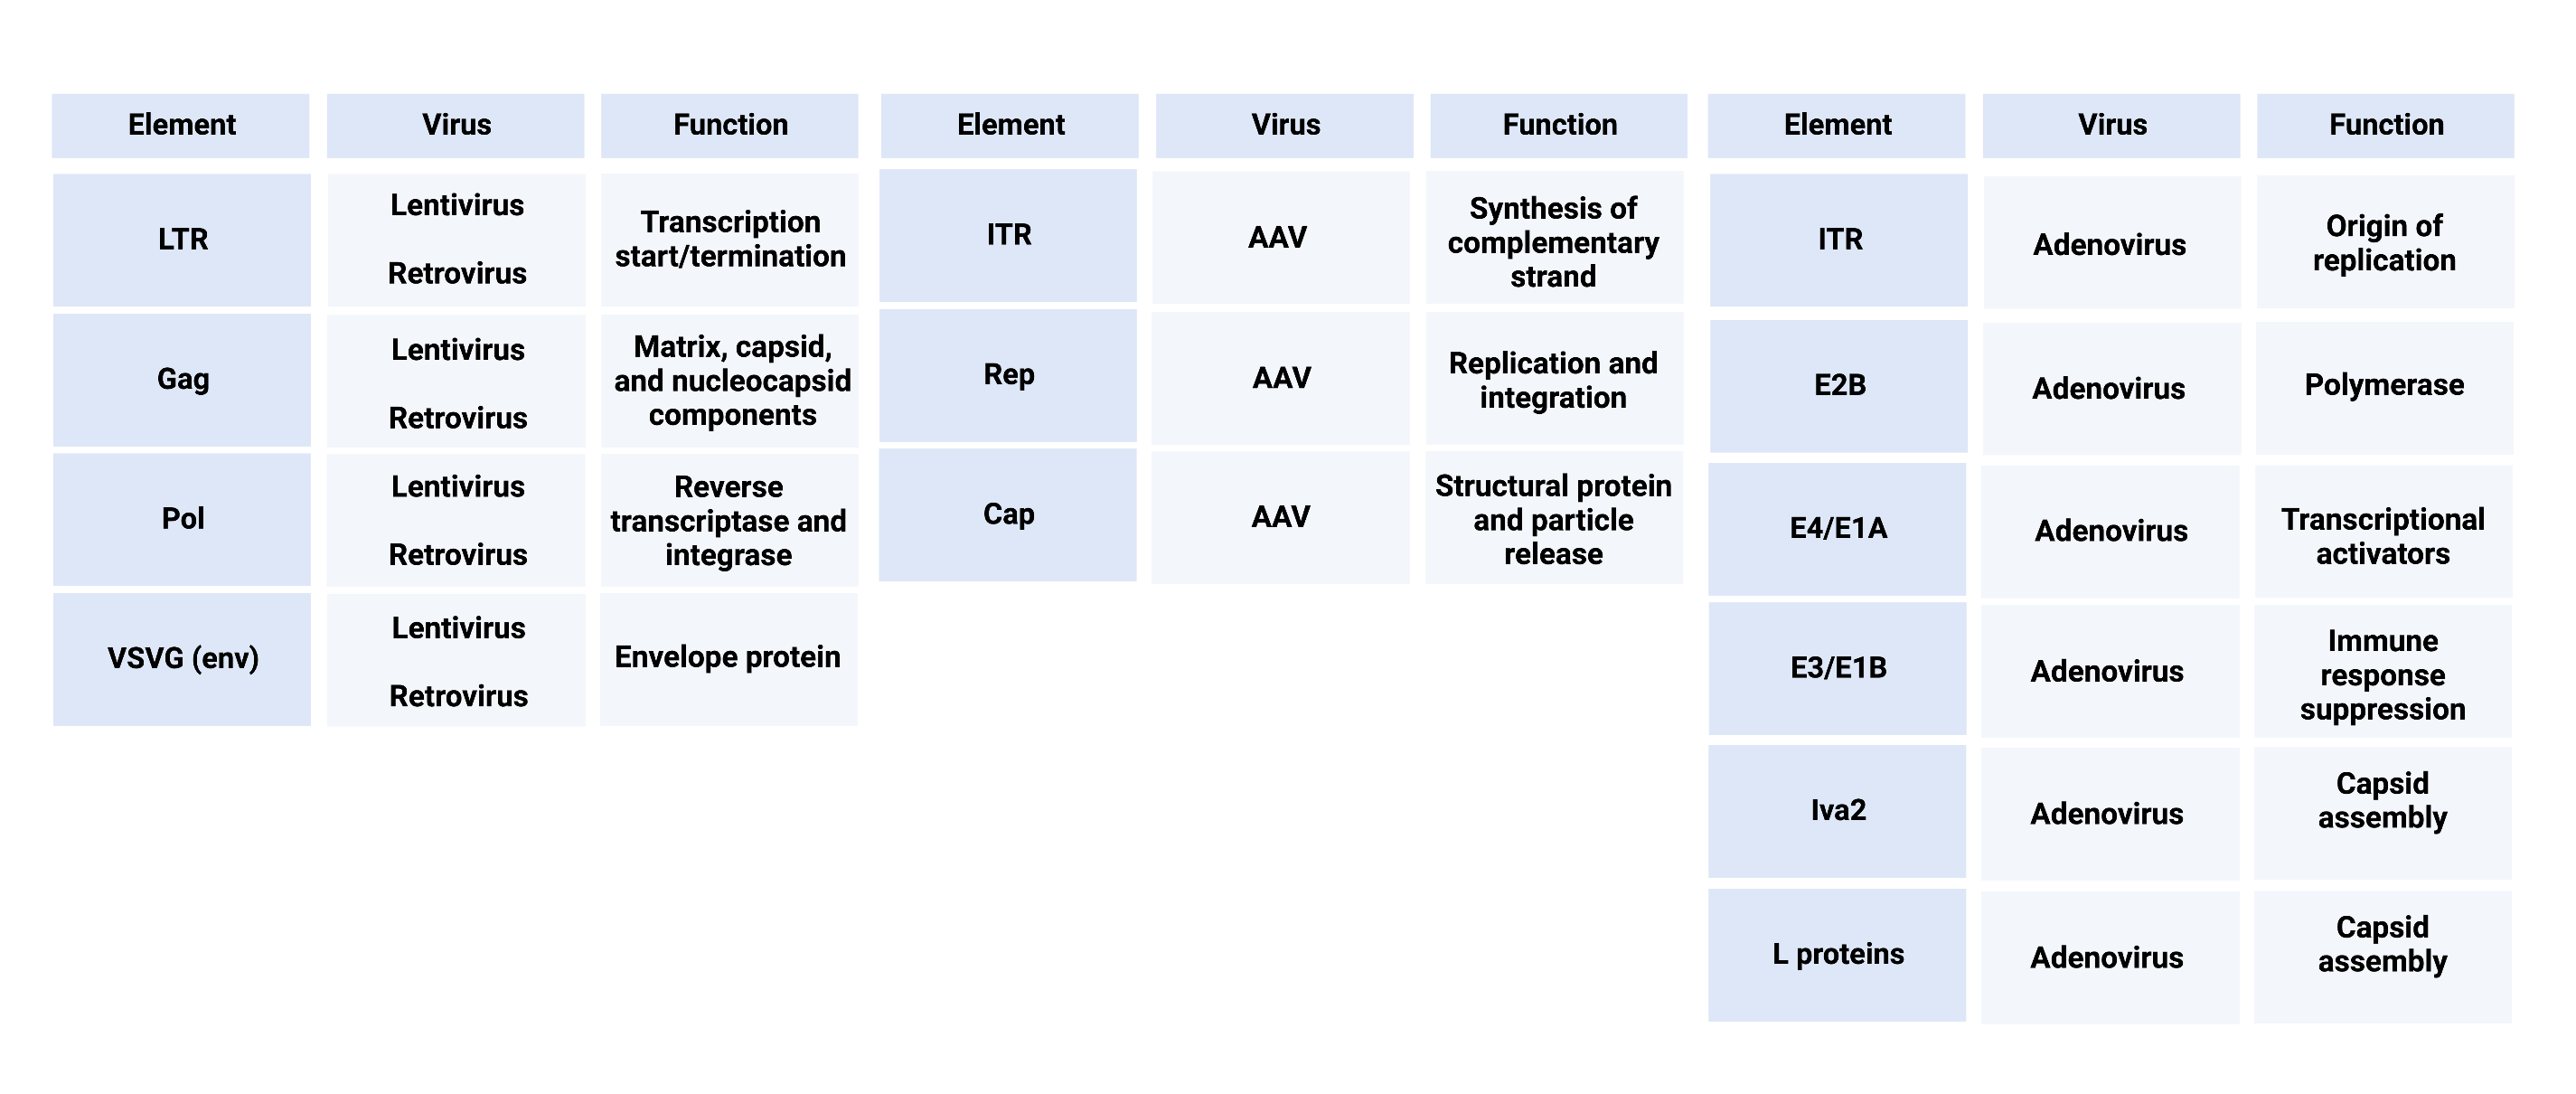 Viral vector element table